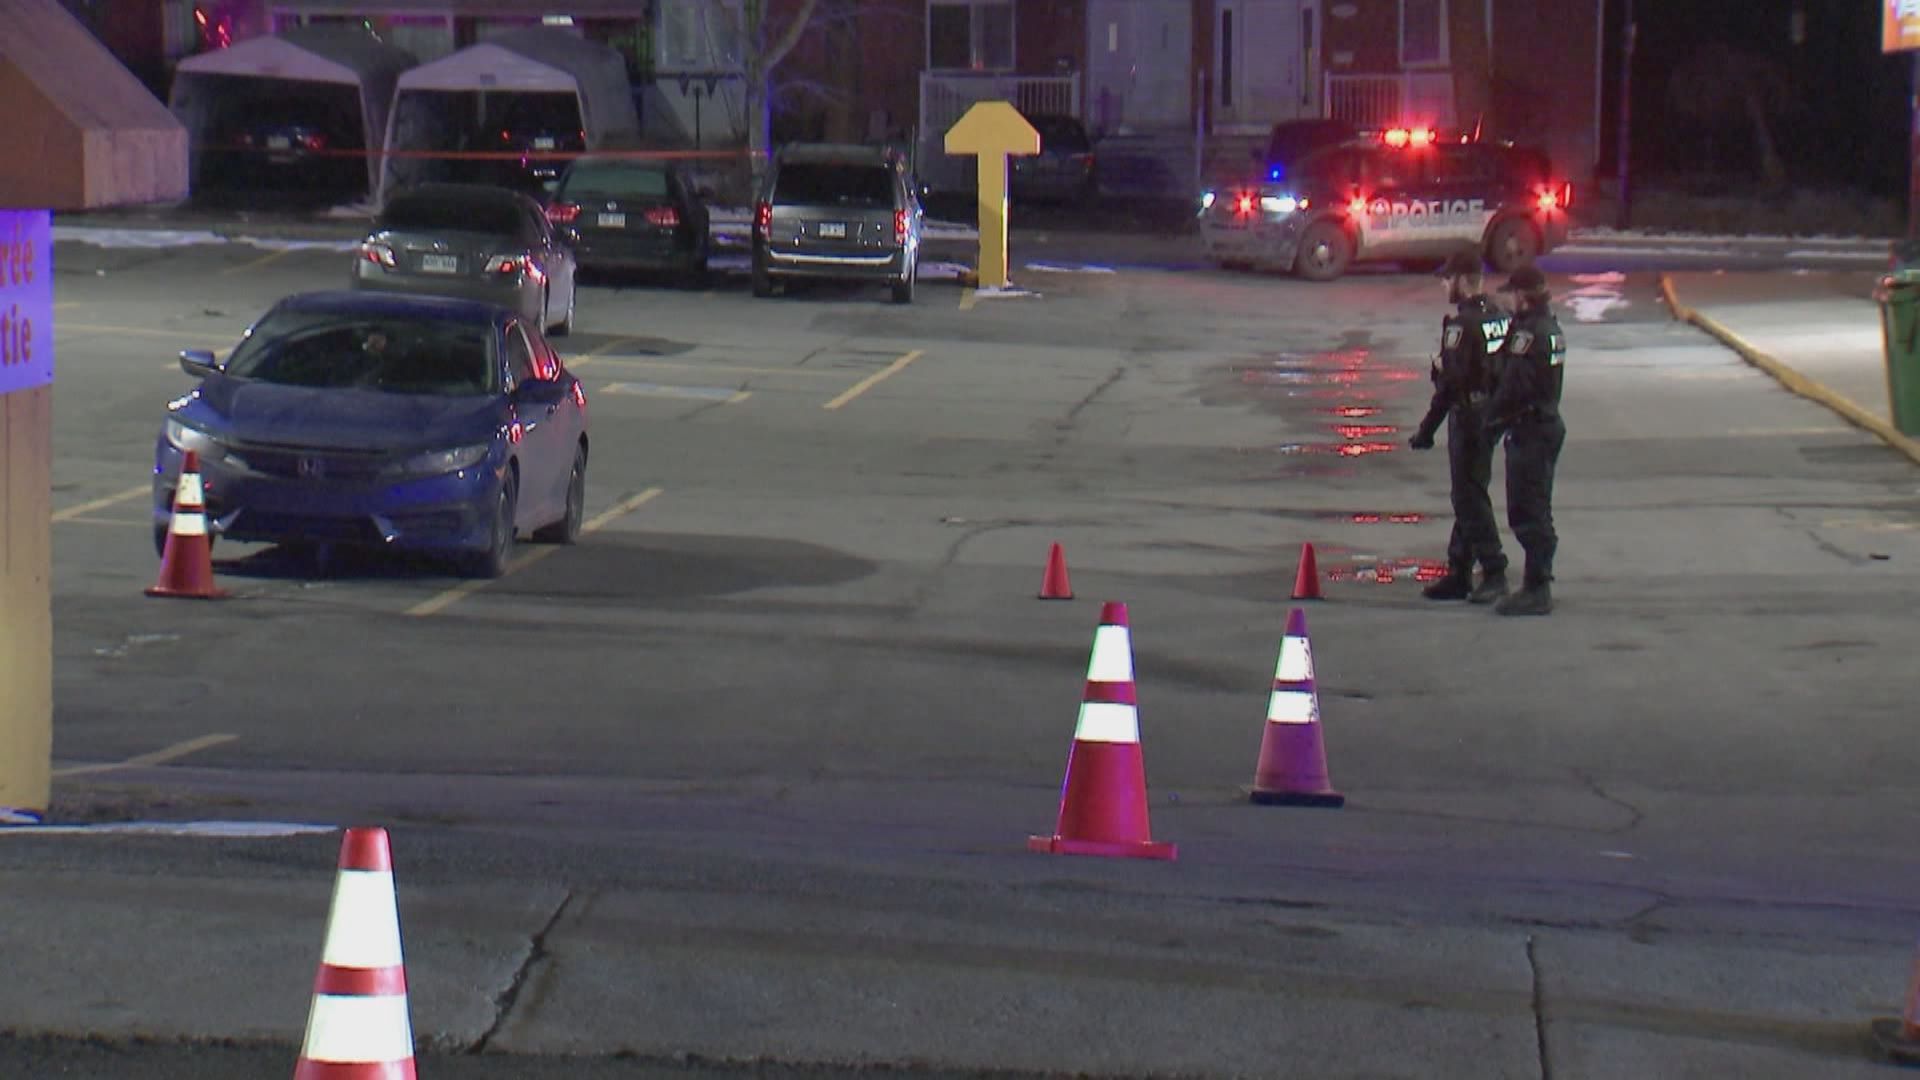 Two people open fire at vehicle in parking lot, victim cooperating: Montreal police